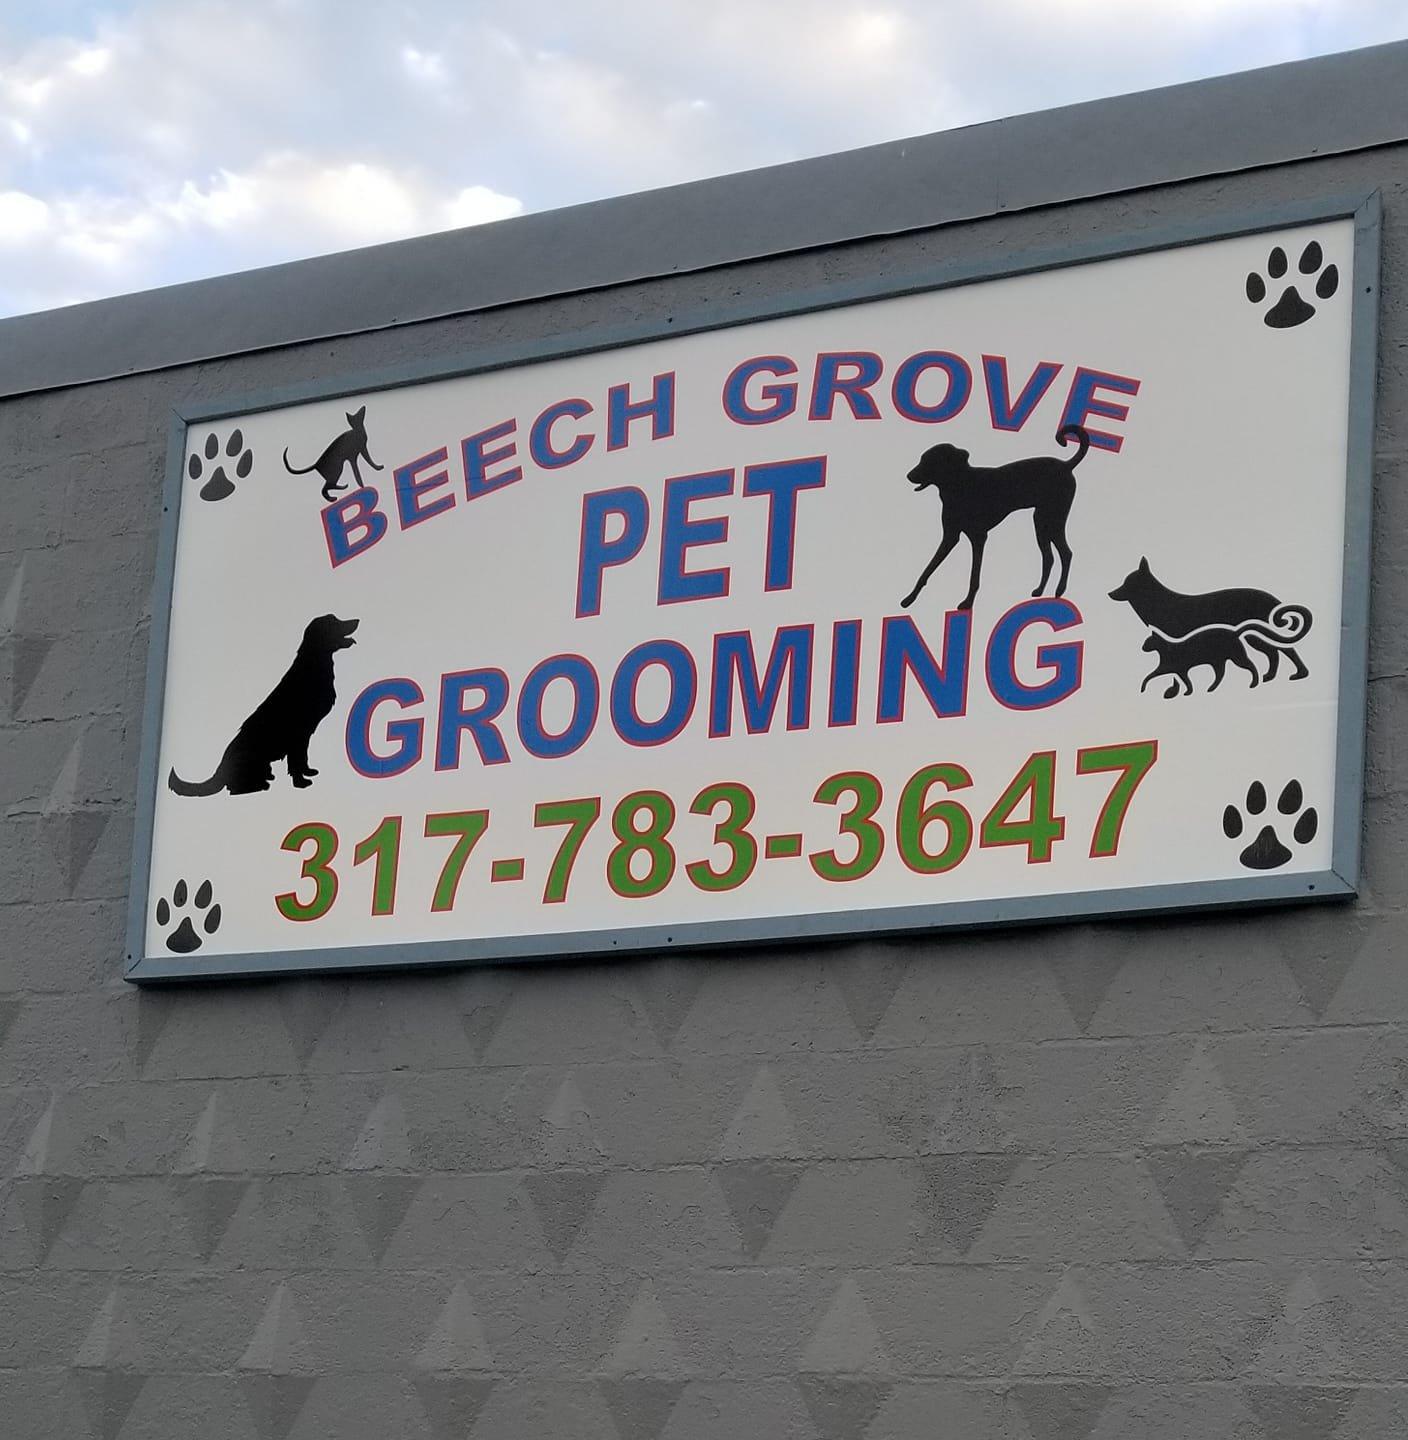 Indy Mobile Pet Grooming and Beech Grove Pet Grooming